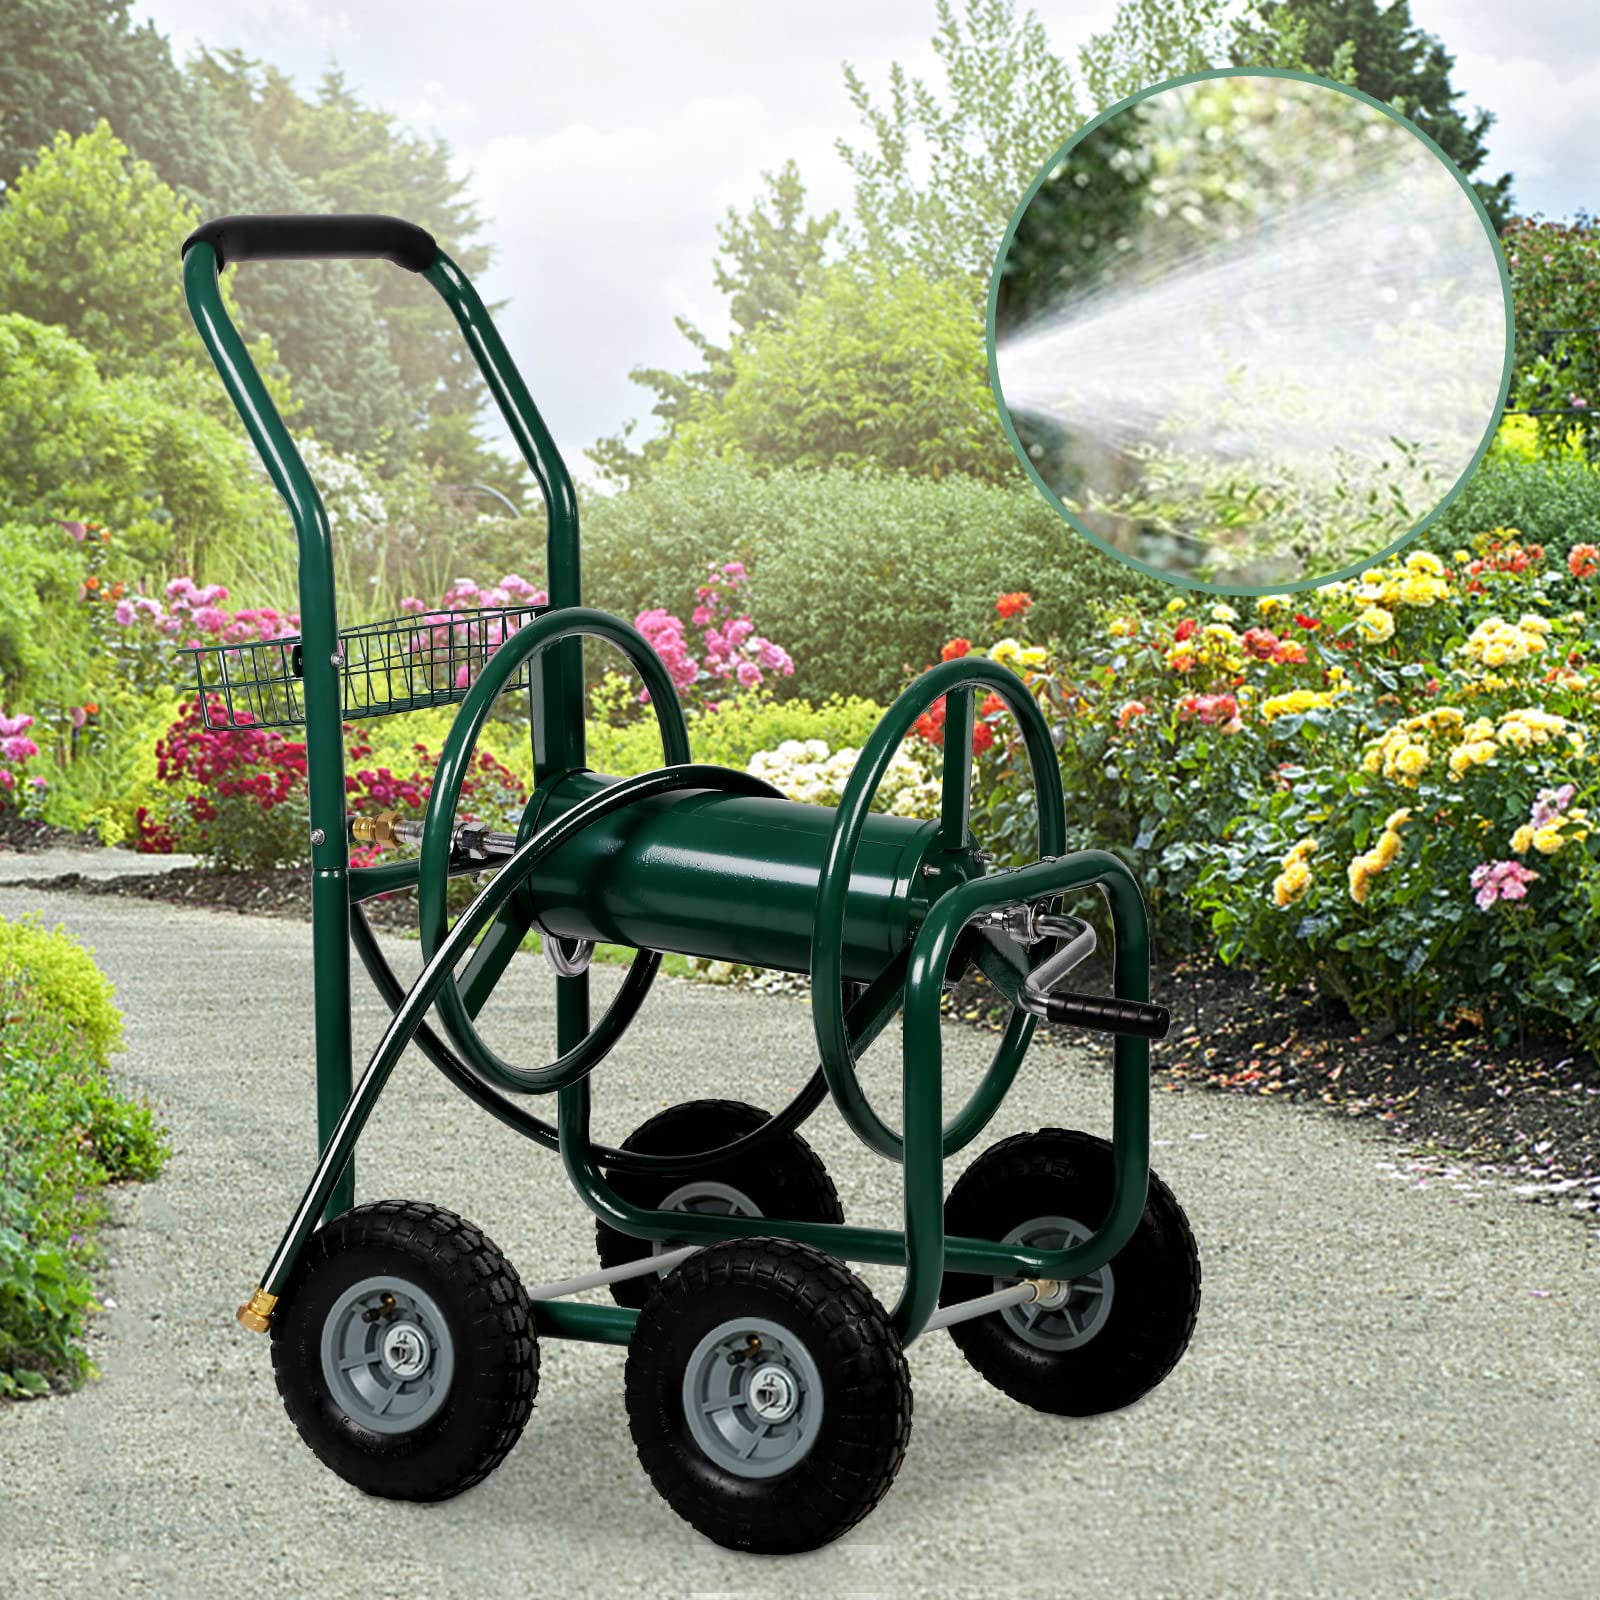 Dropship Garden Hose Reel Cart - 4 Wheels Portable Garden Hose Reel Cart  With Storage Basket Rust Resistant Heavy Duty Water Hose Holder to Sell  Online at a Lower Price